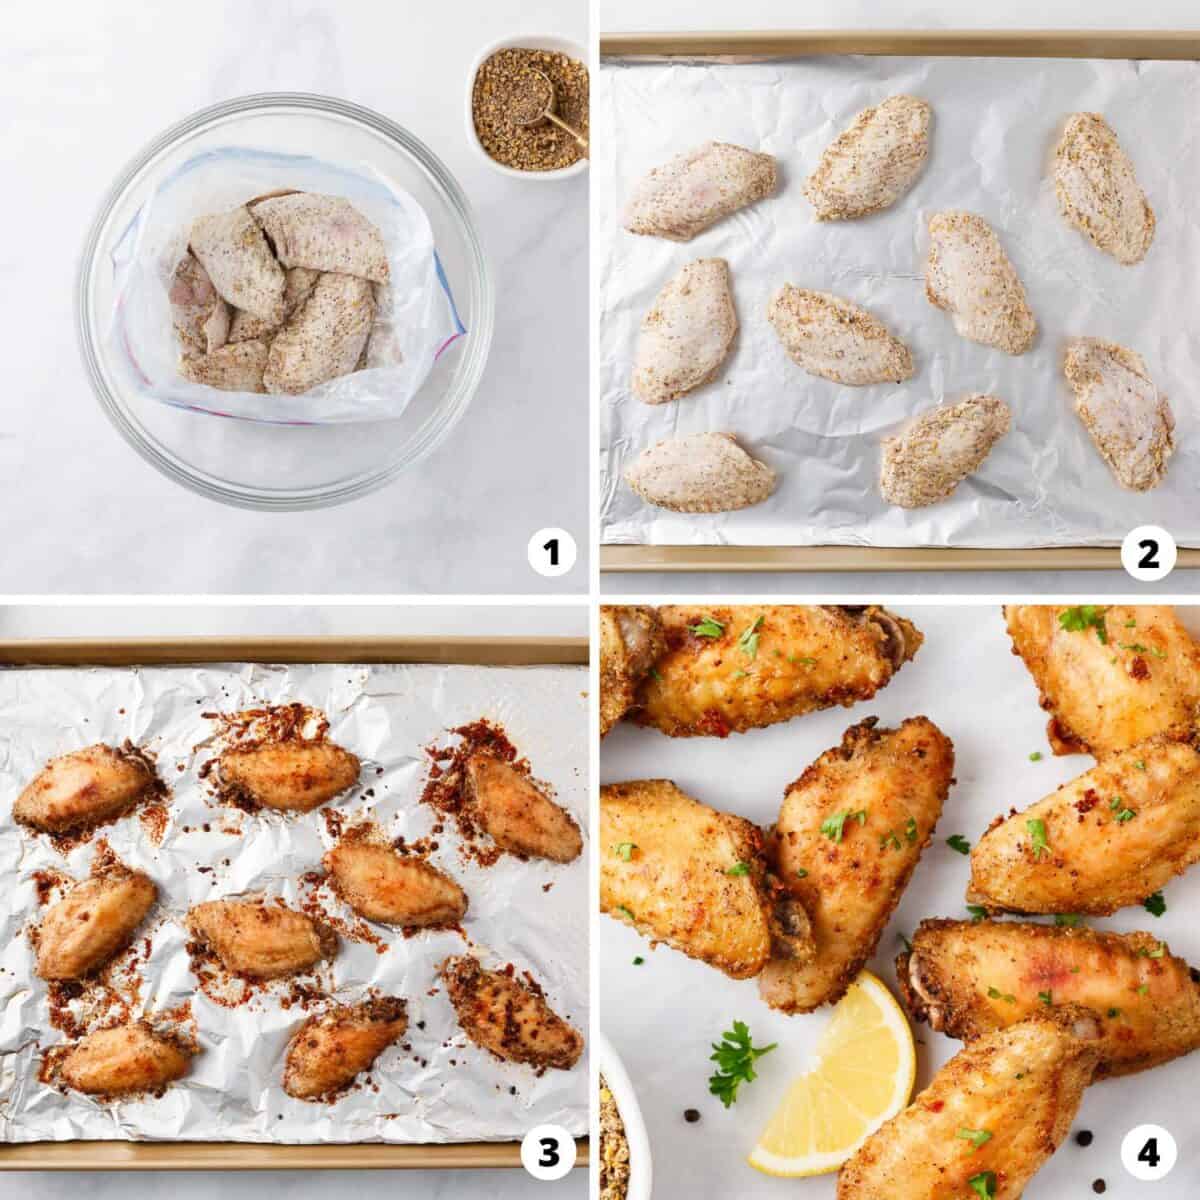 Showing how to make lemon pepper wings in a 4 step collage.